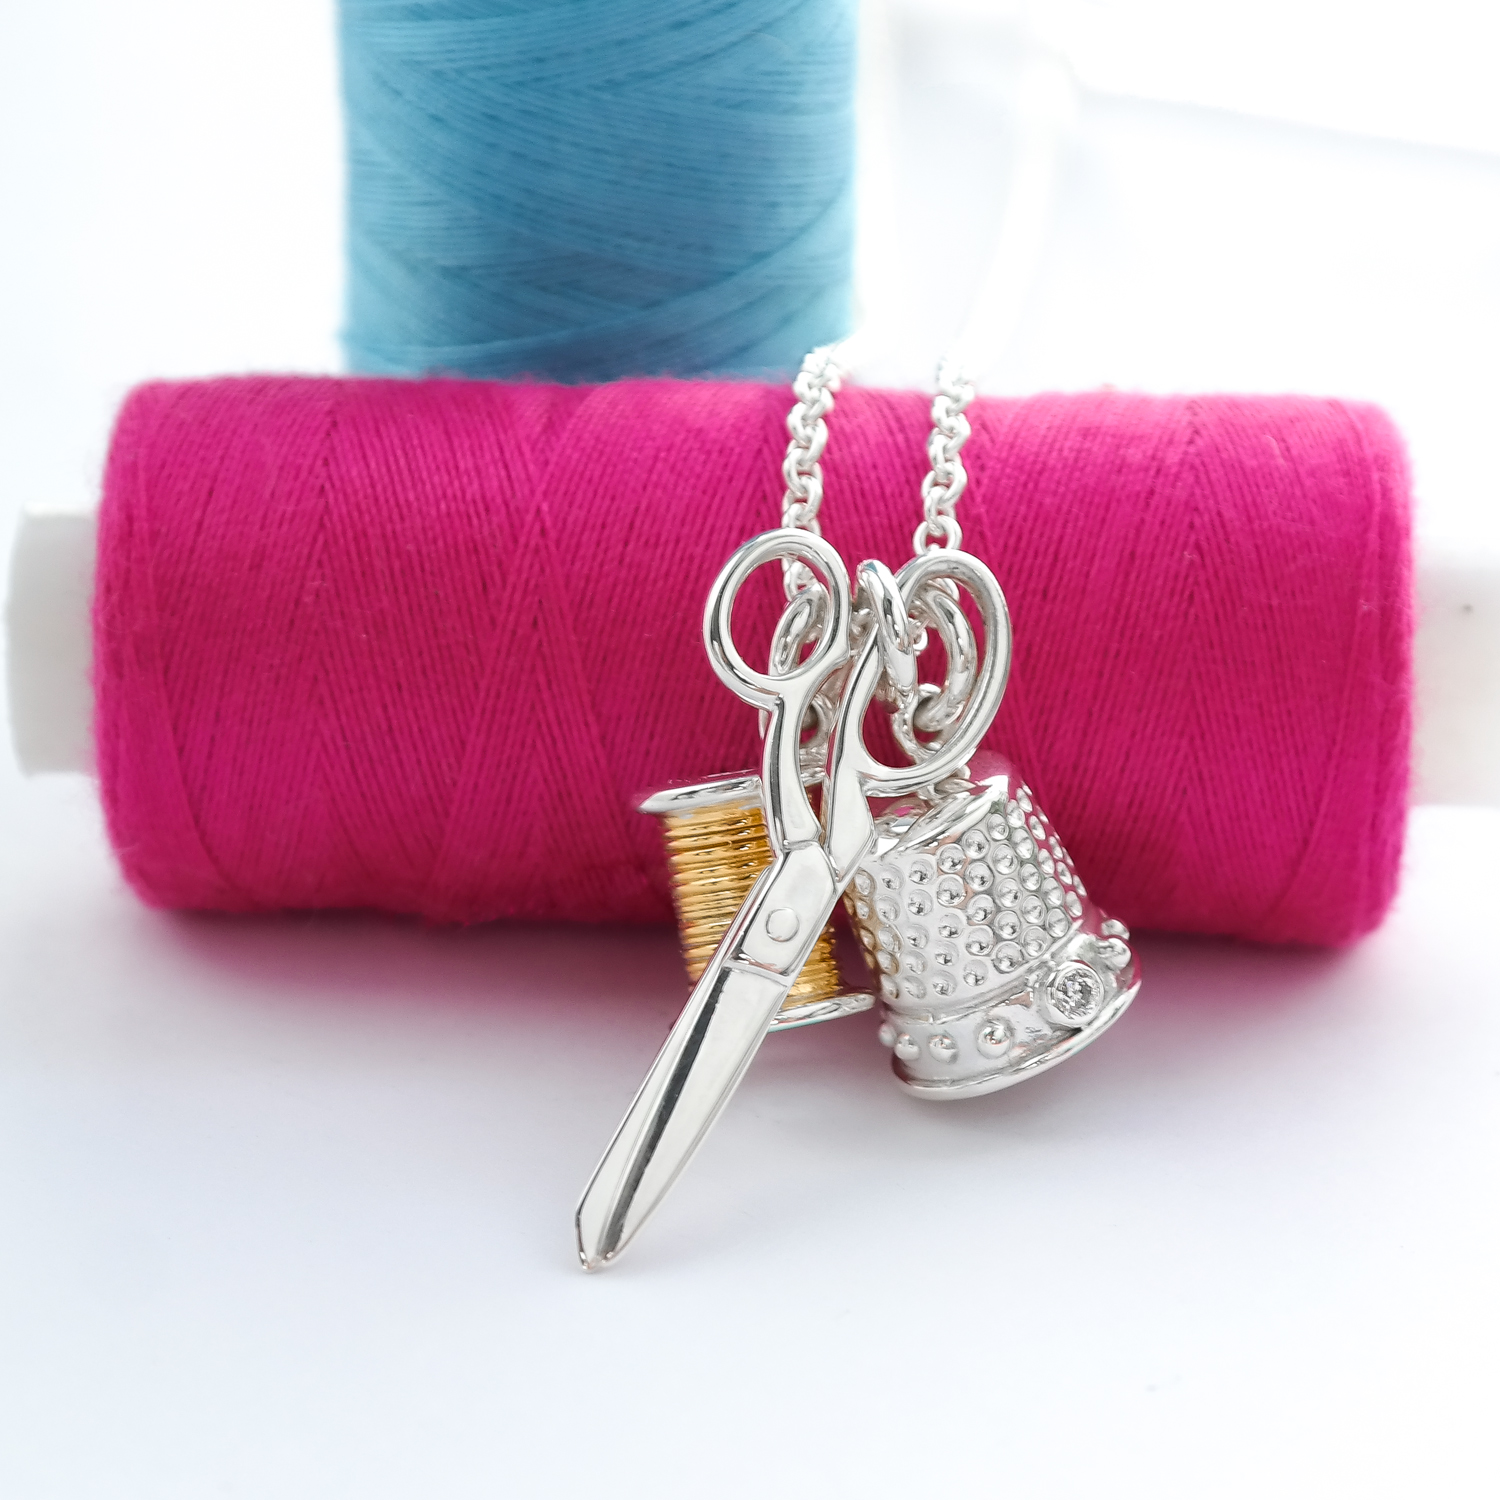 Silver sewing charm necklace with thimble scissors and cotton 